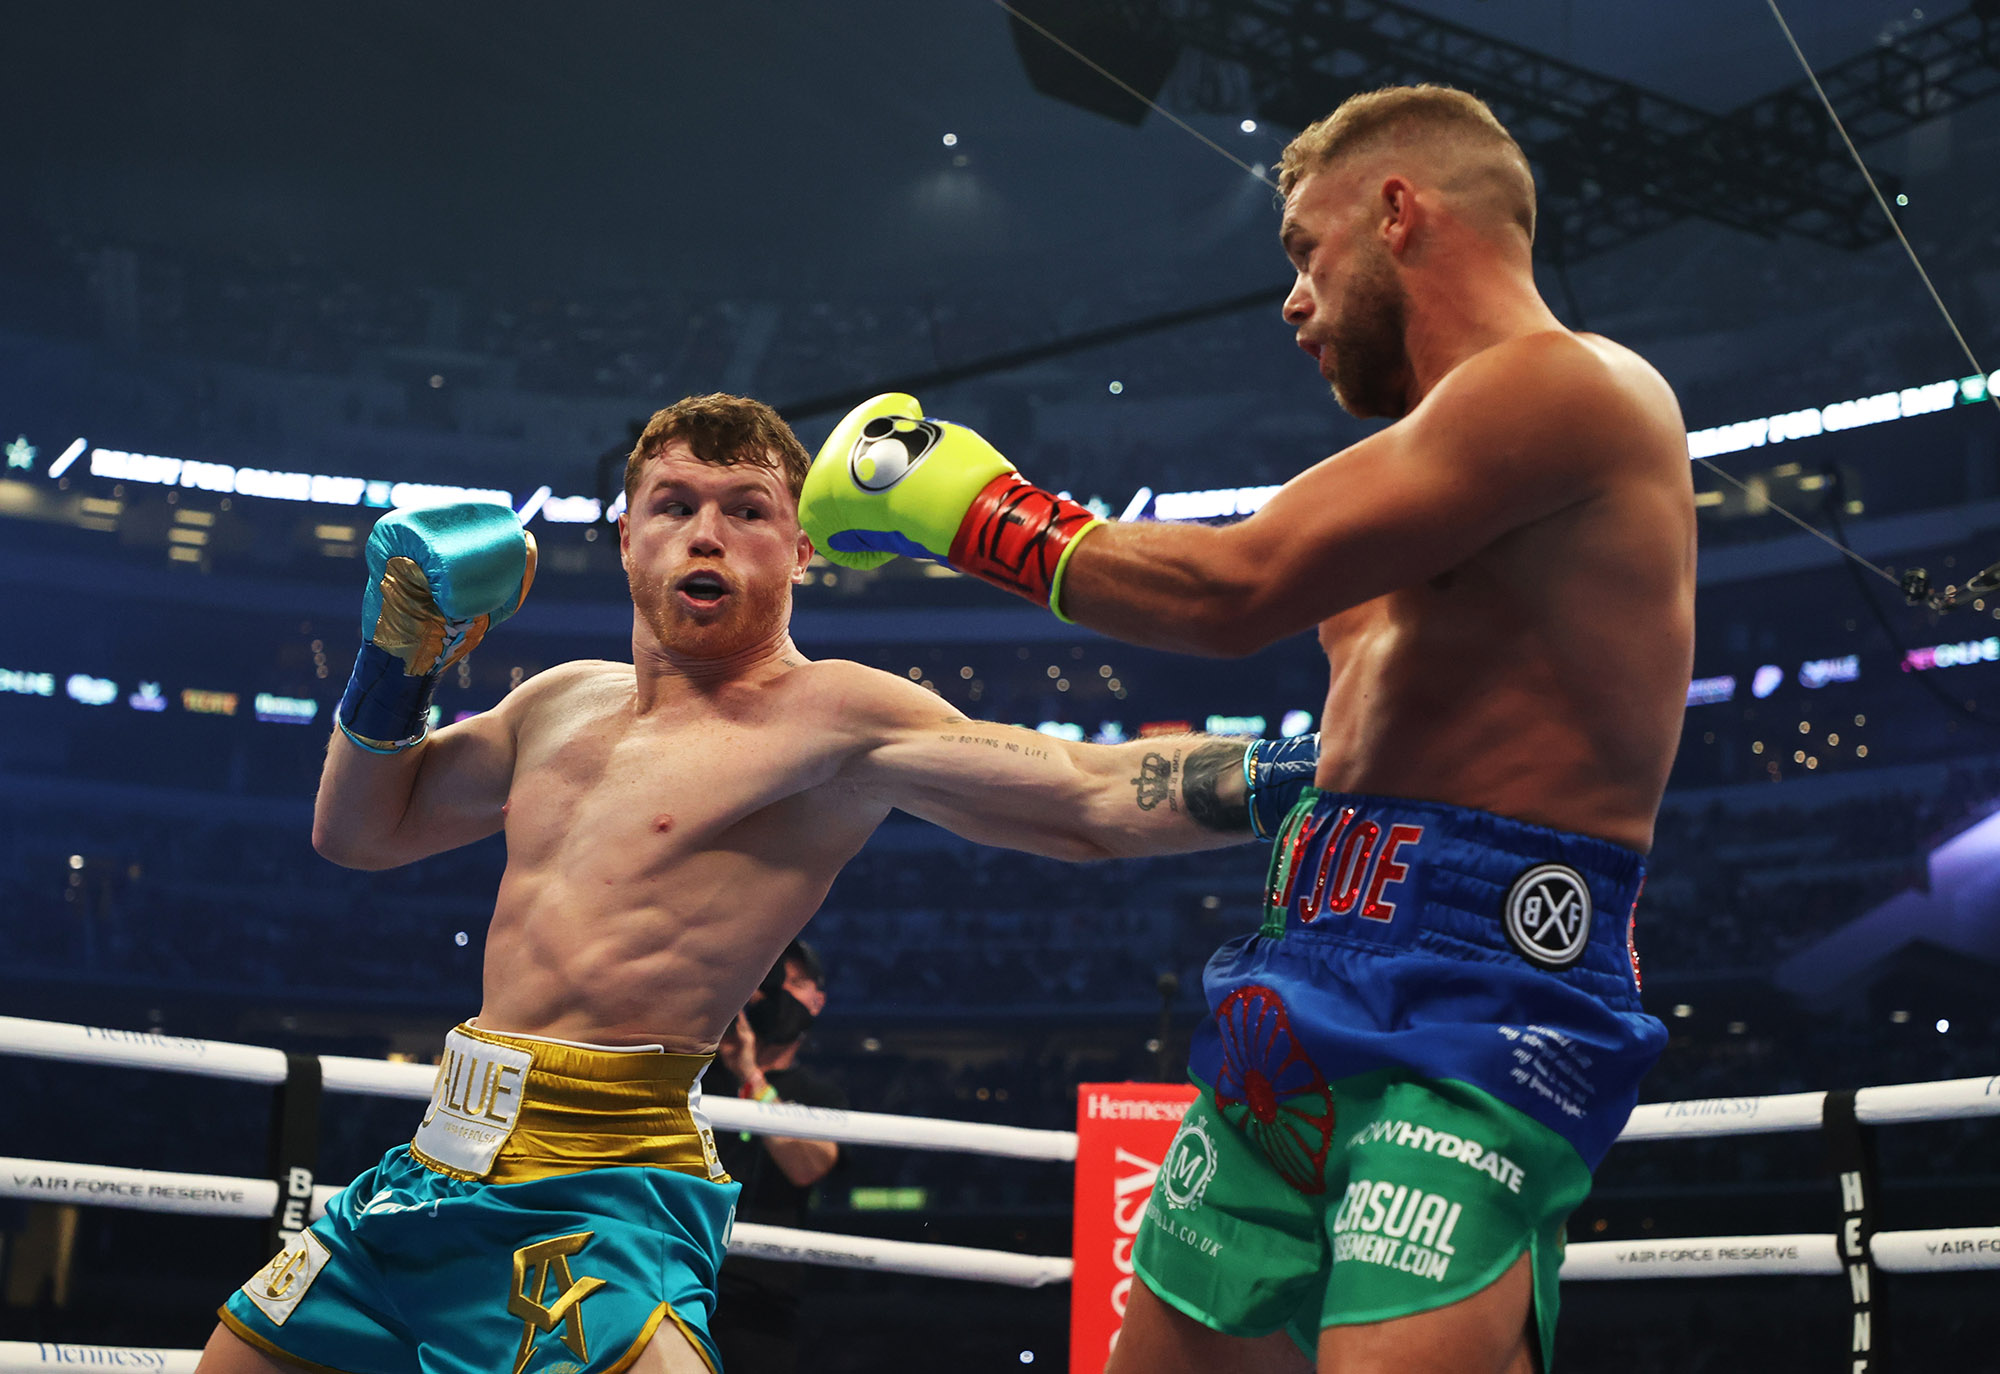 DAZN Tops Mobile Streaming Sessions With Alvarez-Saunders Fight